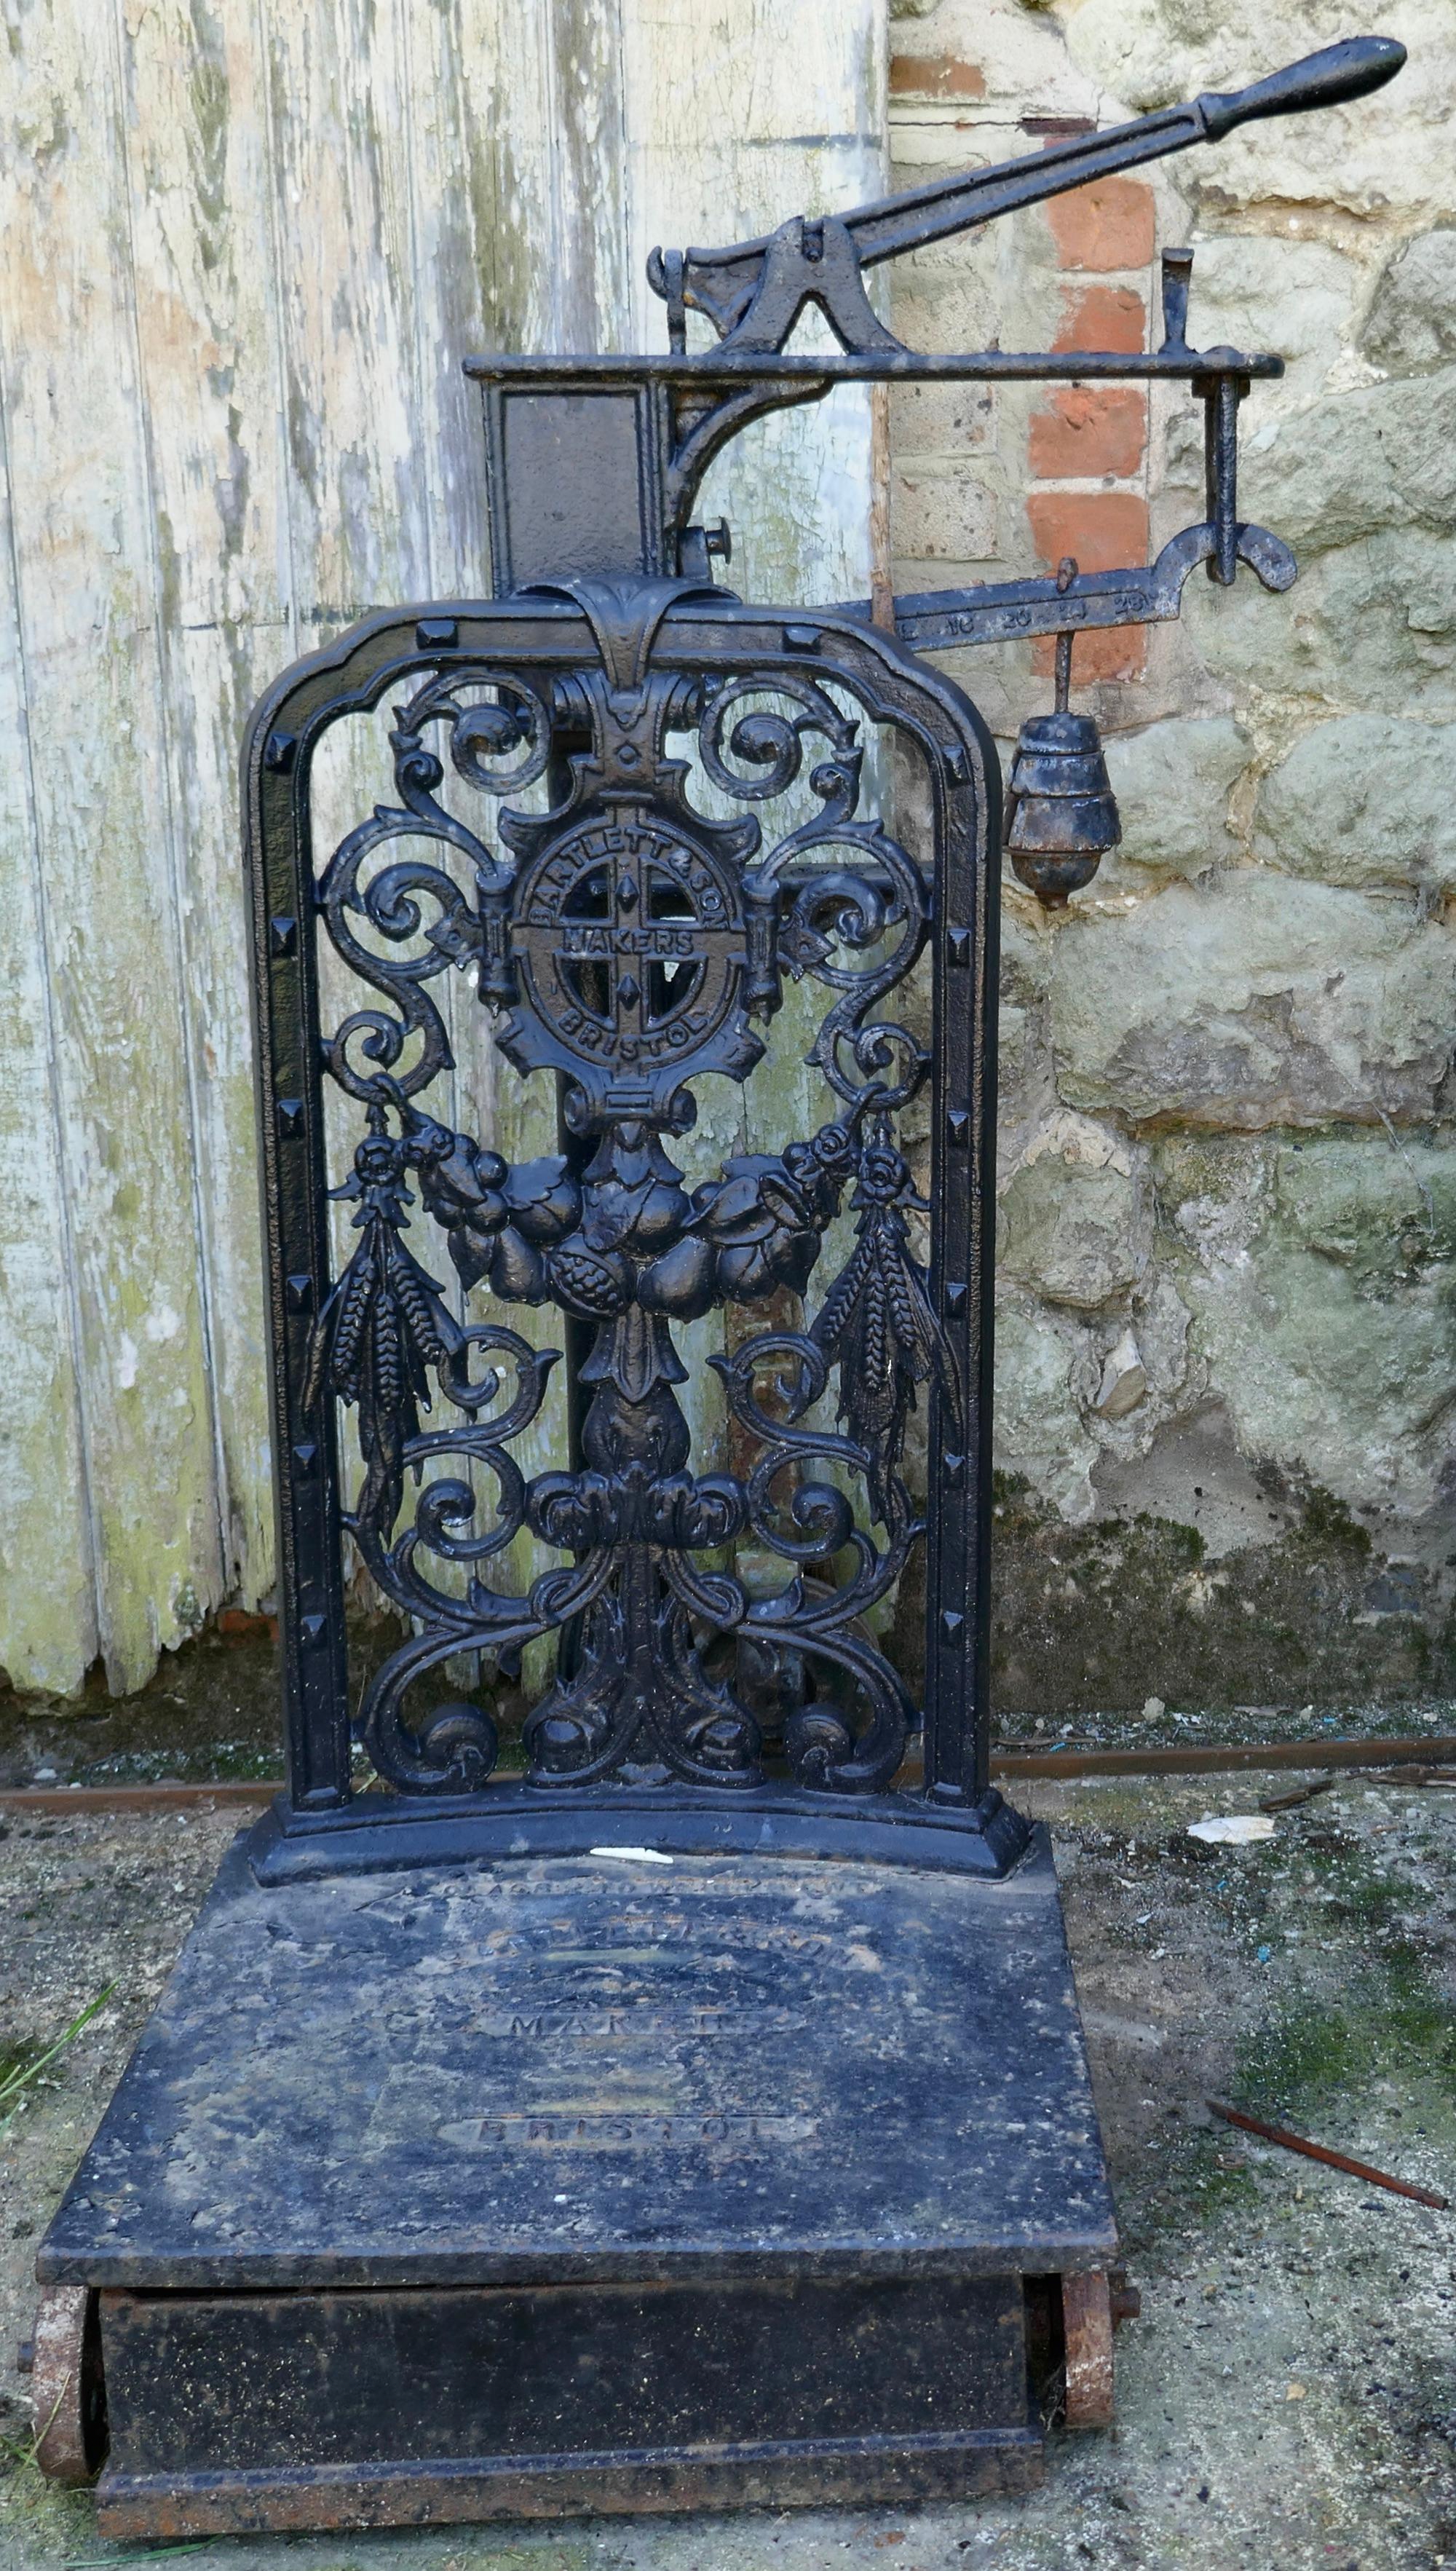 Ornate 19th Century Agricultural Sack Scales by Bartlett & Son, Bristol. 

This is a very ornate set of Scales in cast iron they would have been used for weighing sacks of many agricultural wares from the farm like corn or potatoes 
They are made